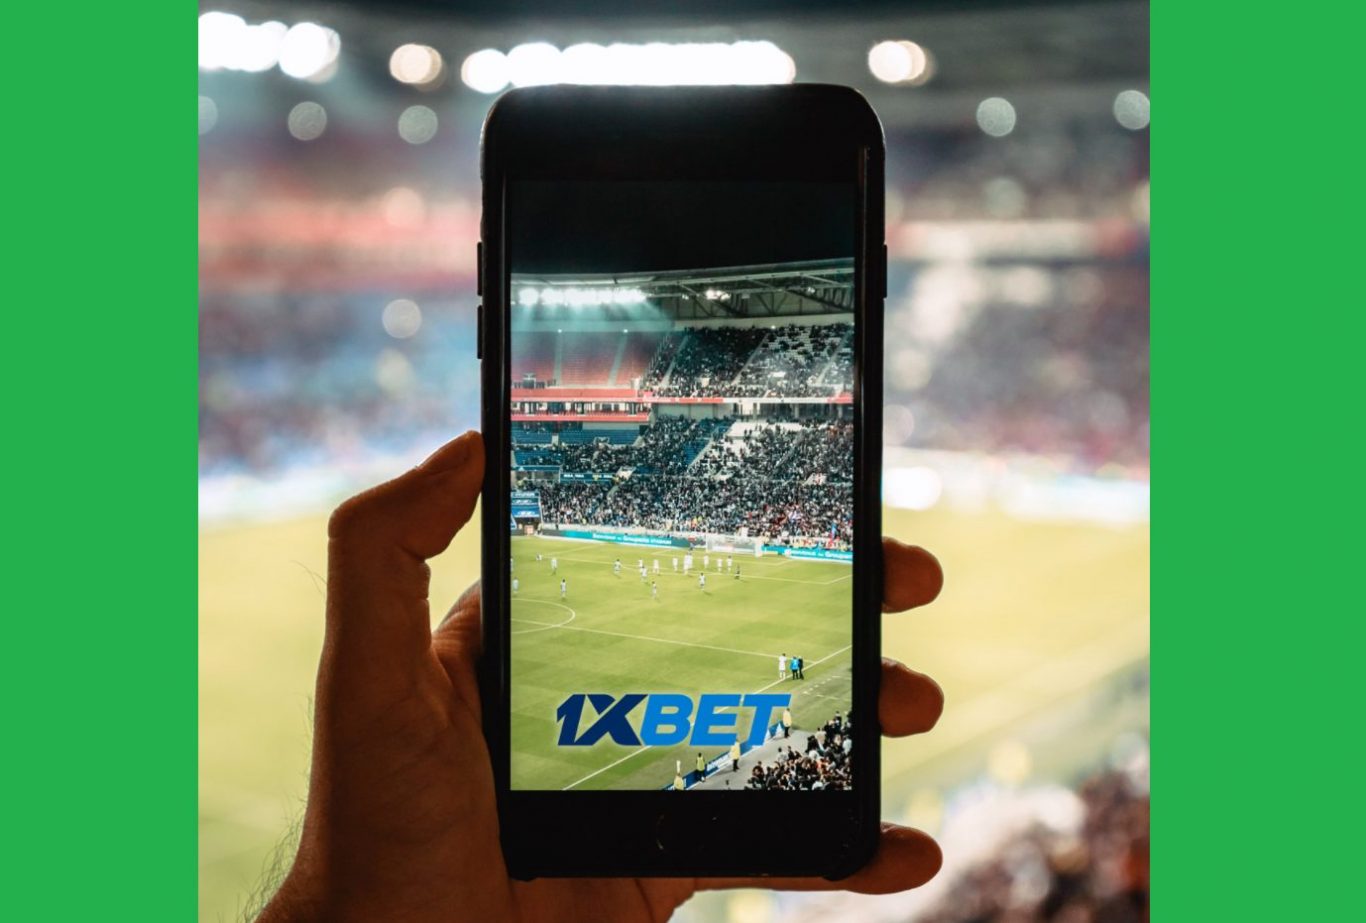 1xBet app for Windows, Android, and iOS devices